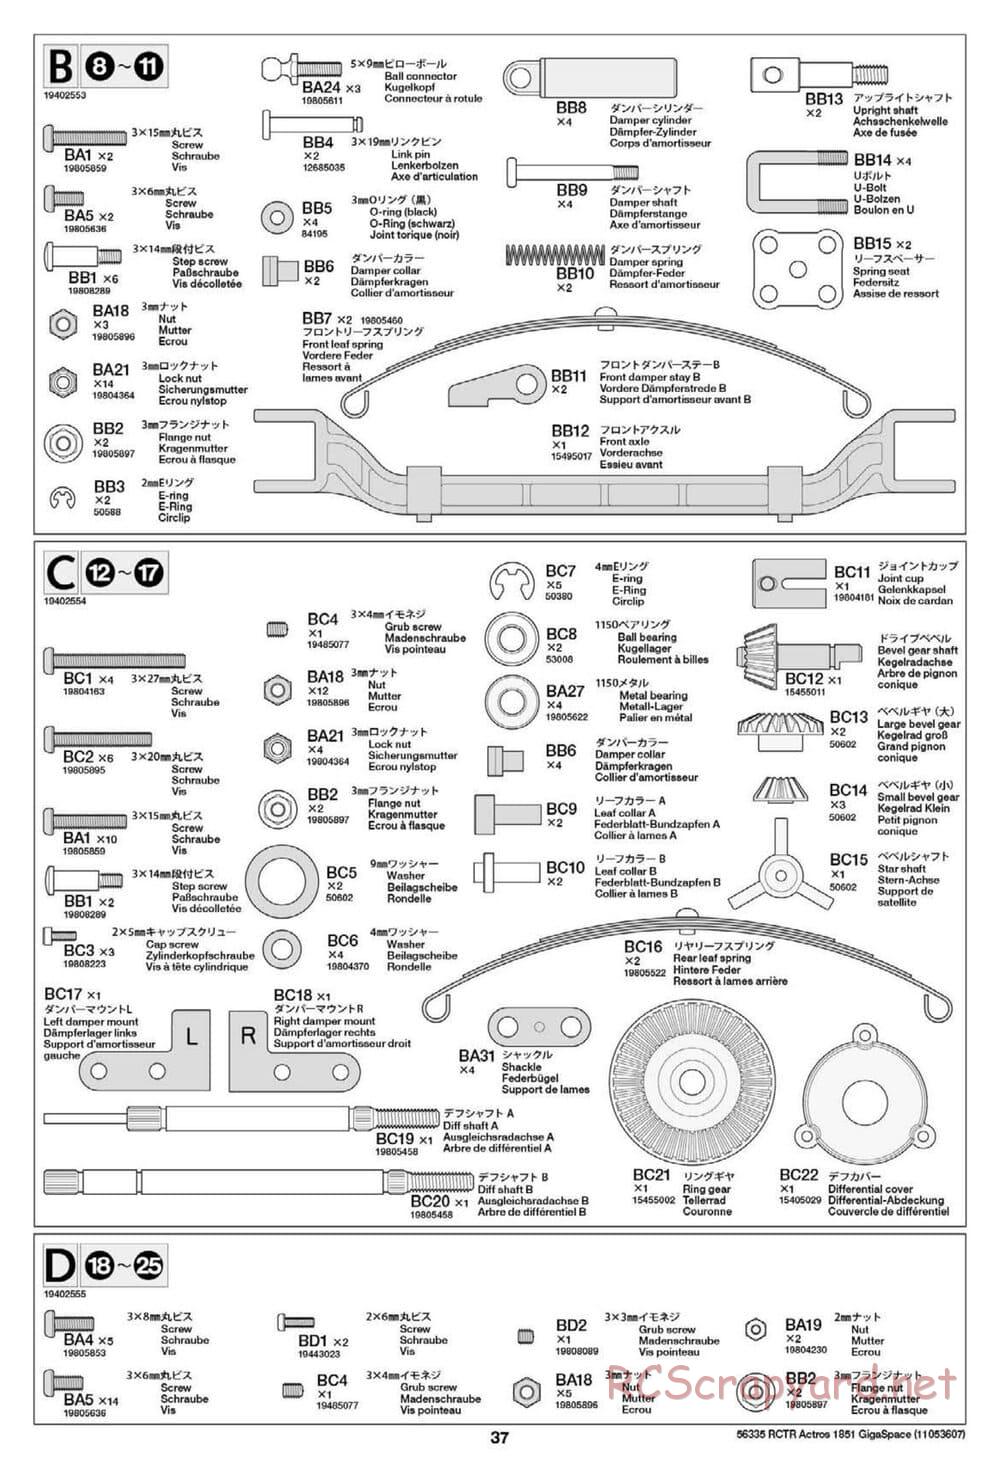 Tamiya - Mercedes-Benz Actros 1851 Gigaspace Tractor Truck Chassis - Manual - Page 37